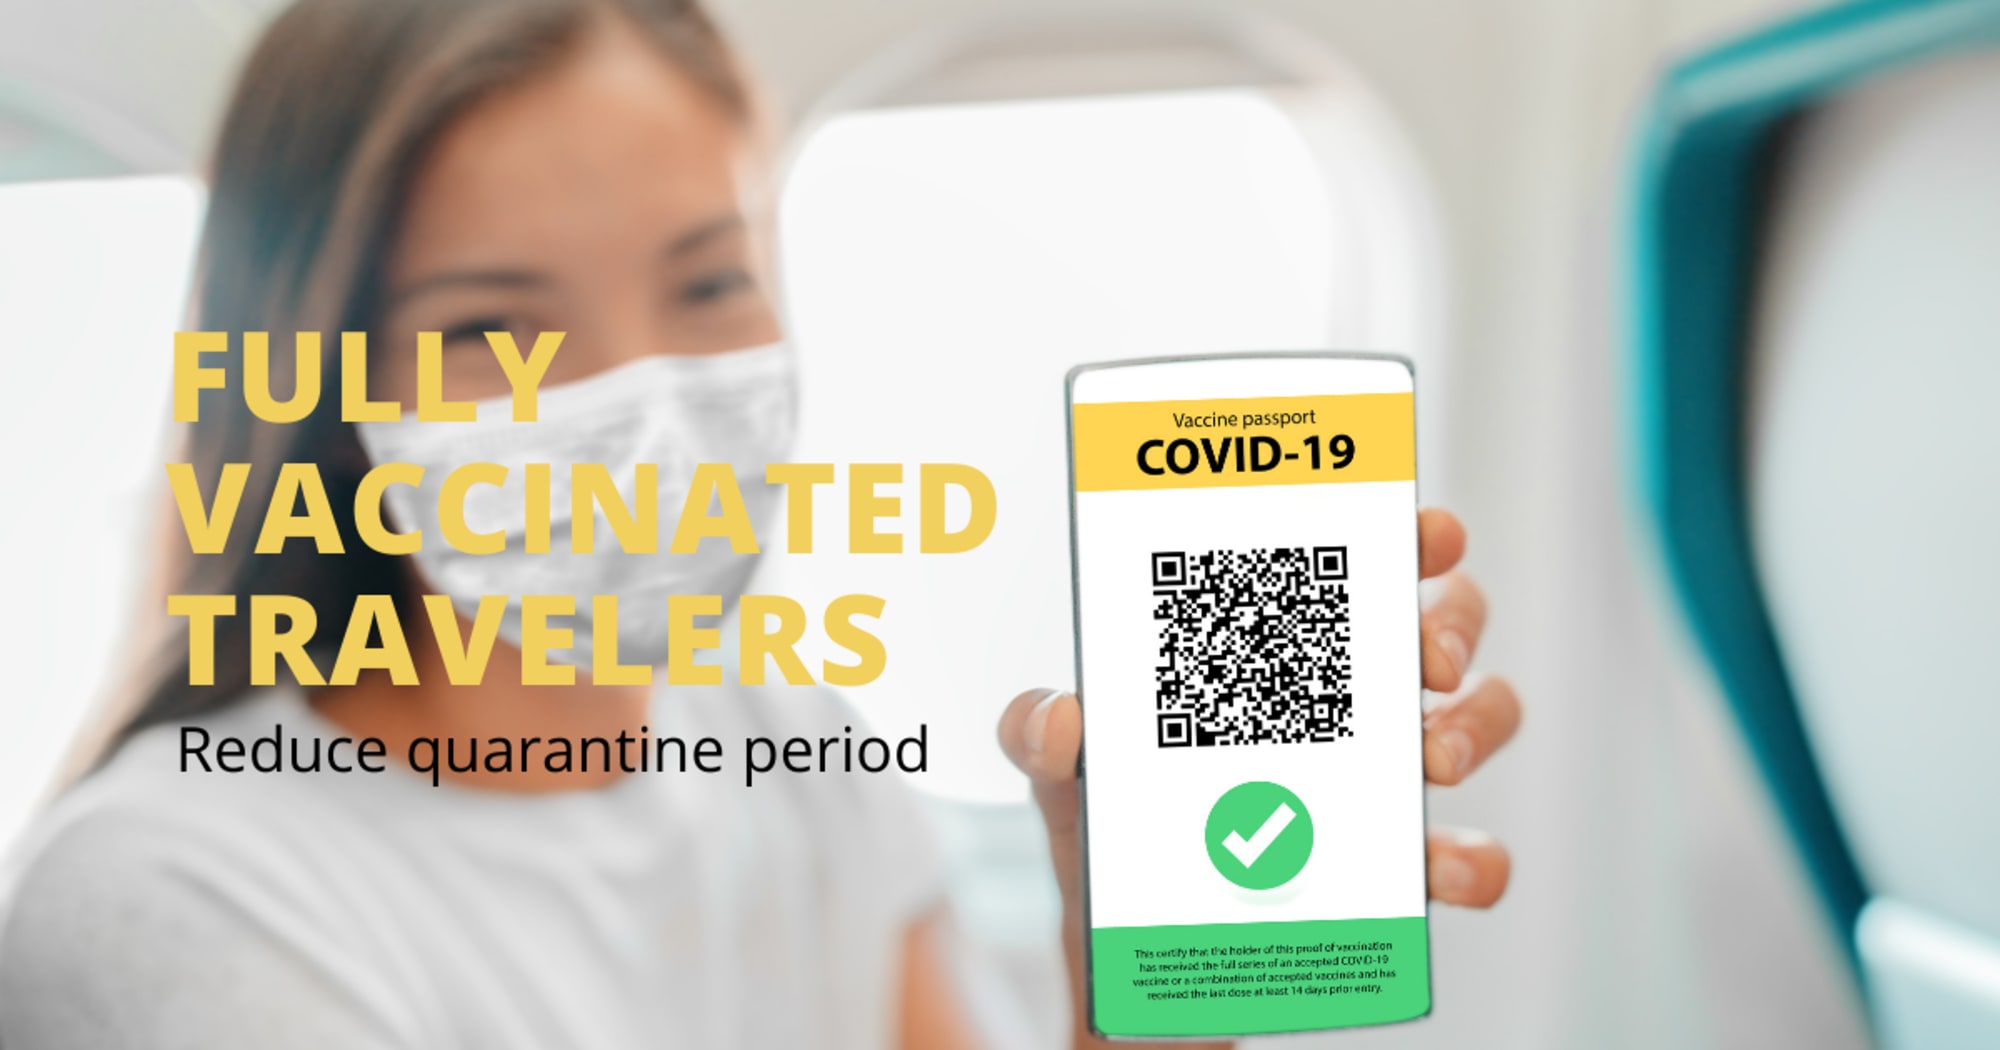 "A welcome development," DOT backs call to reduce the quarantine period for fully vaccinated travelers